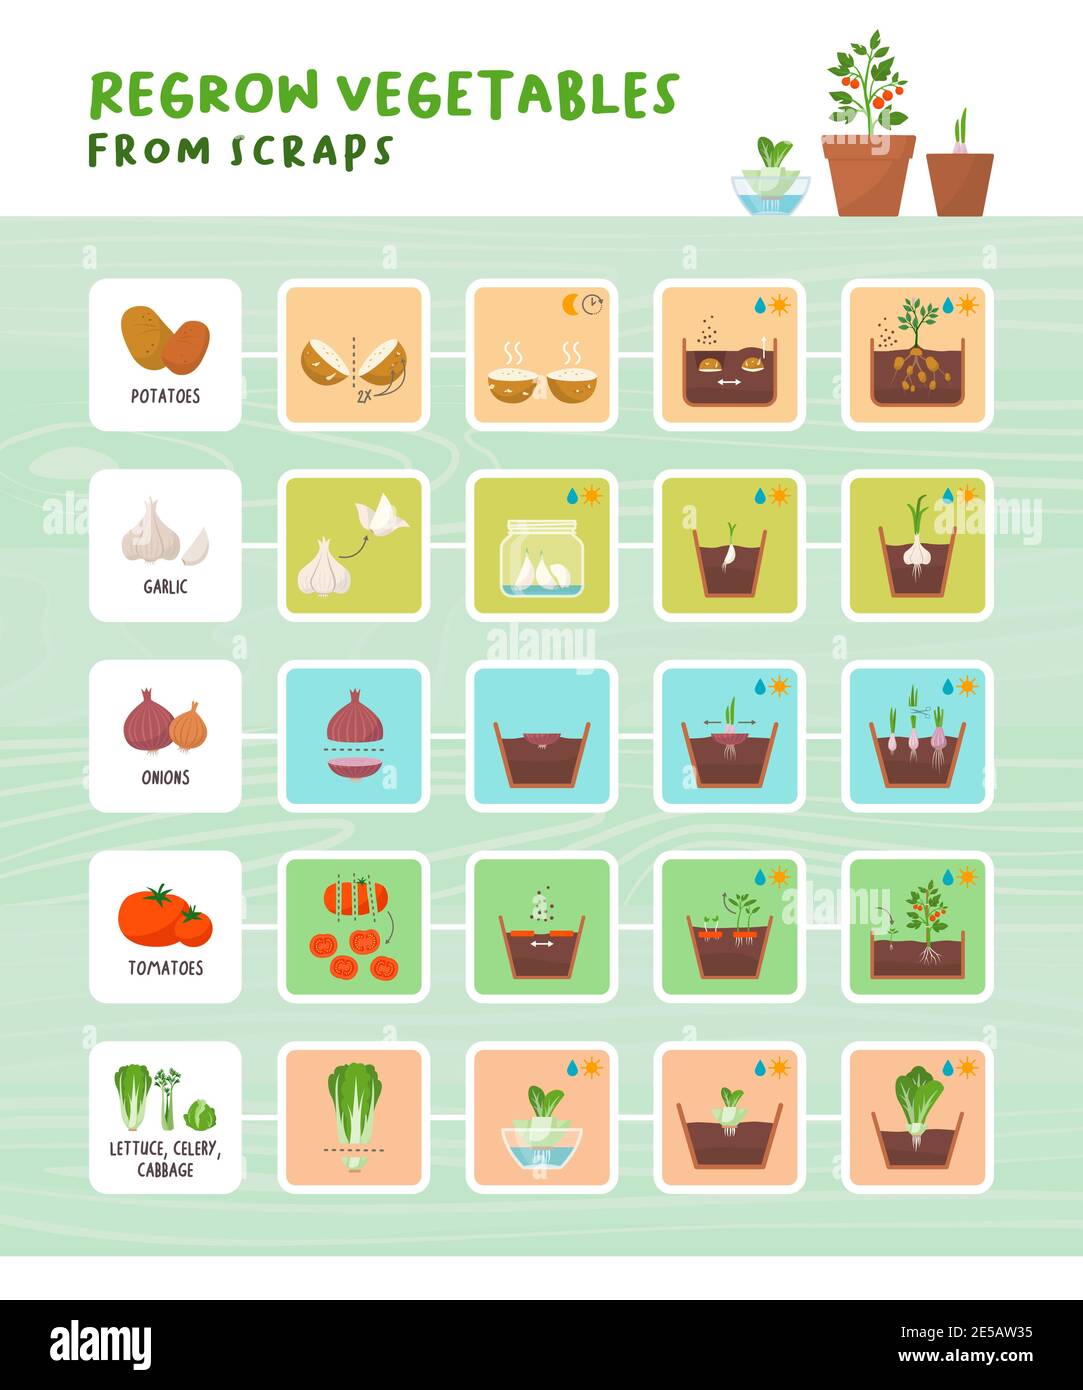 Regrow vegetables from scraps infographic: home gardening, zero waste and organic healthy food concept Stock Vector